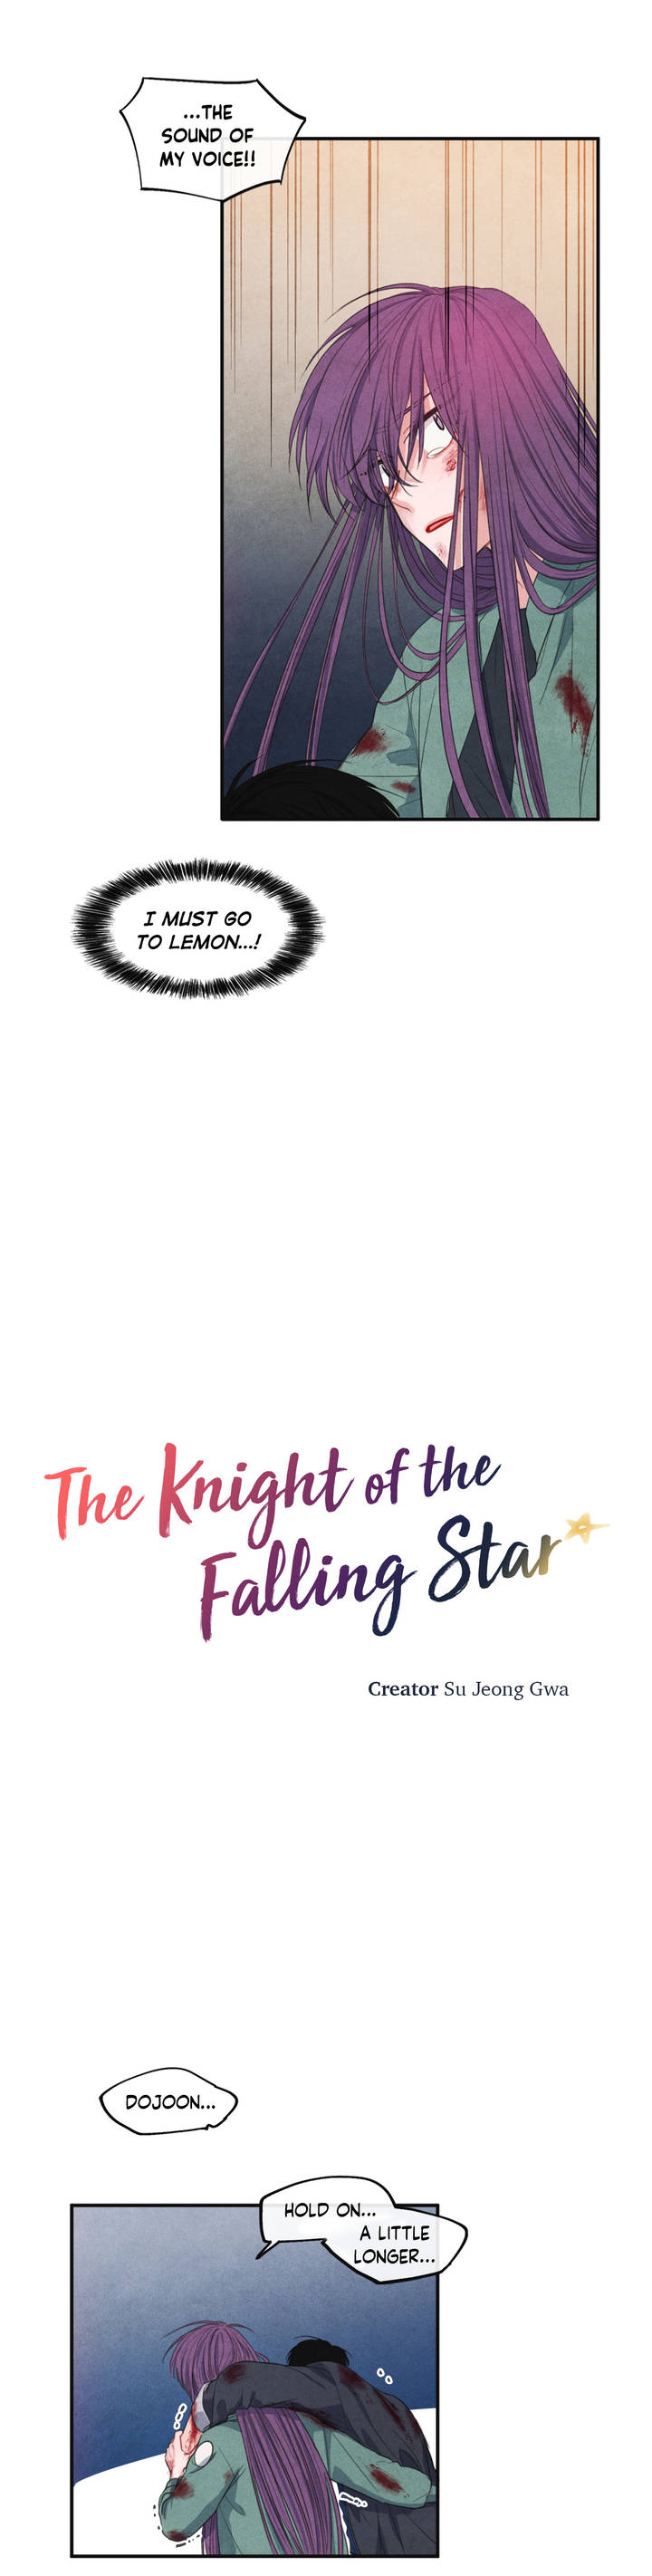 The Knight Of The Falling Star - Page 2